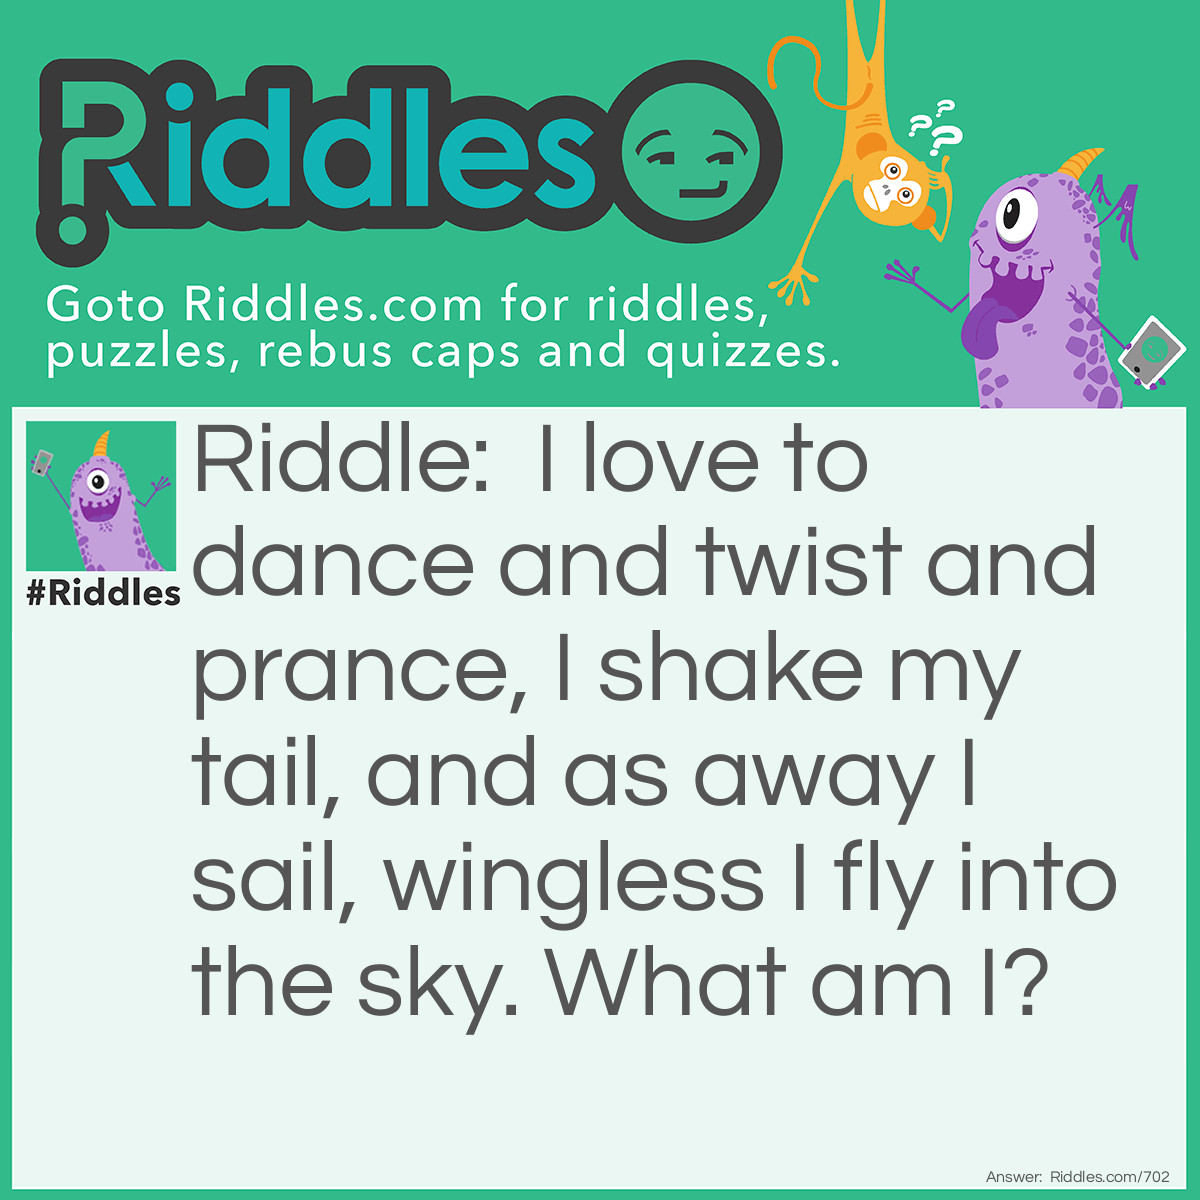 Riddle: I love to dance and twist and prance, I shake my tail, and as away I sail, wingless I fly into the sky.
What am I? Answer: A Kite.